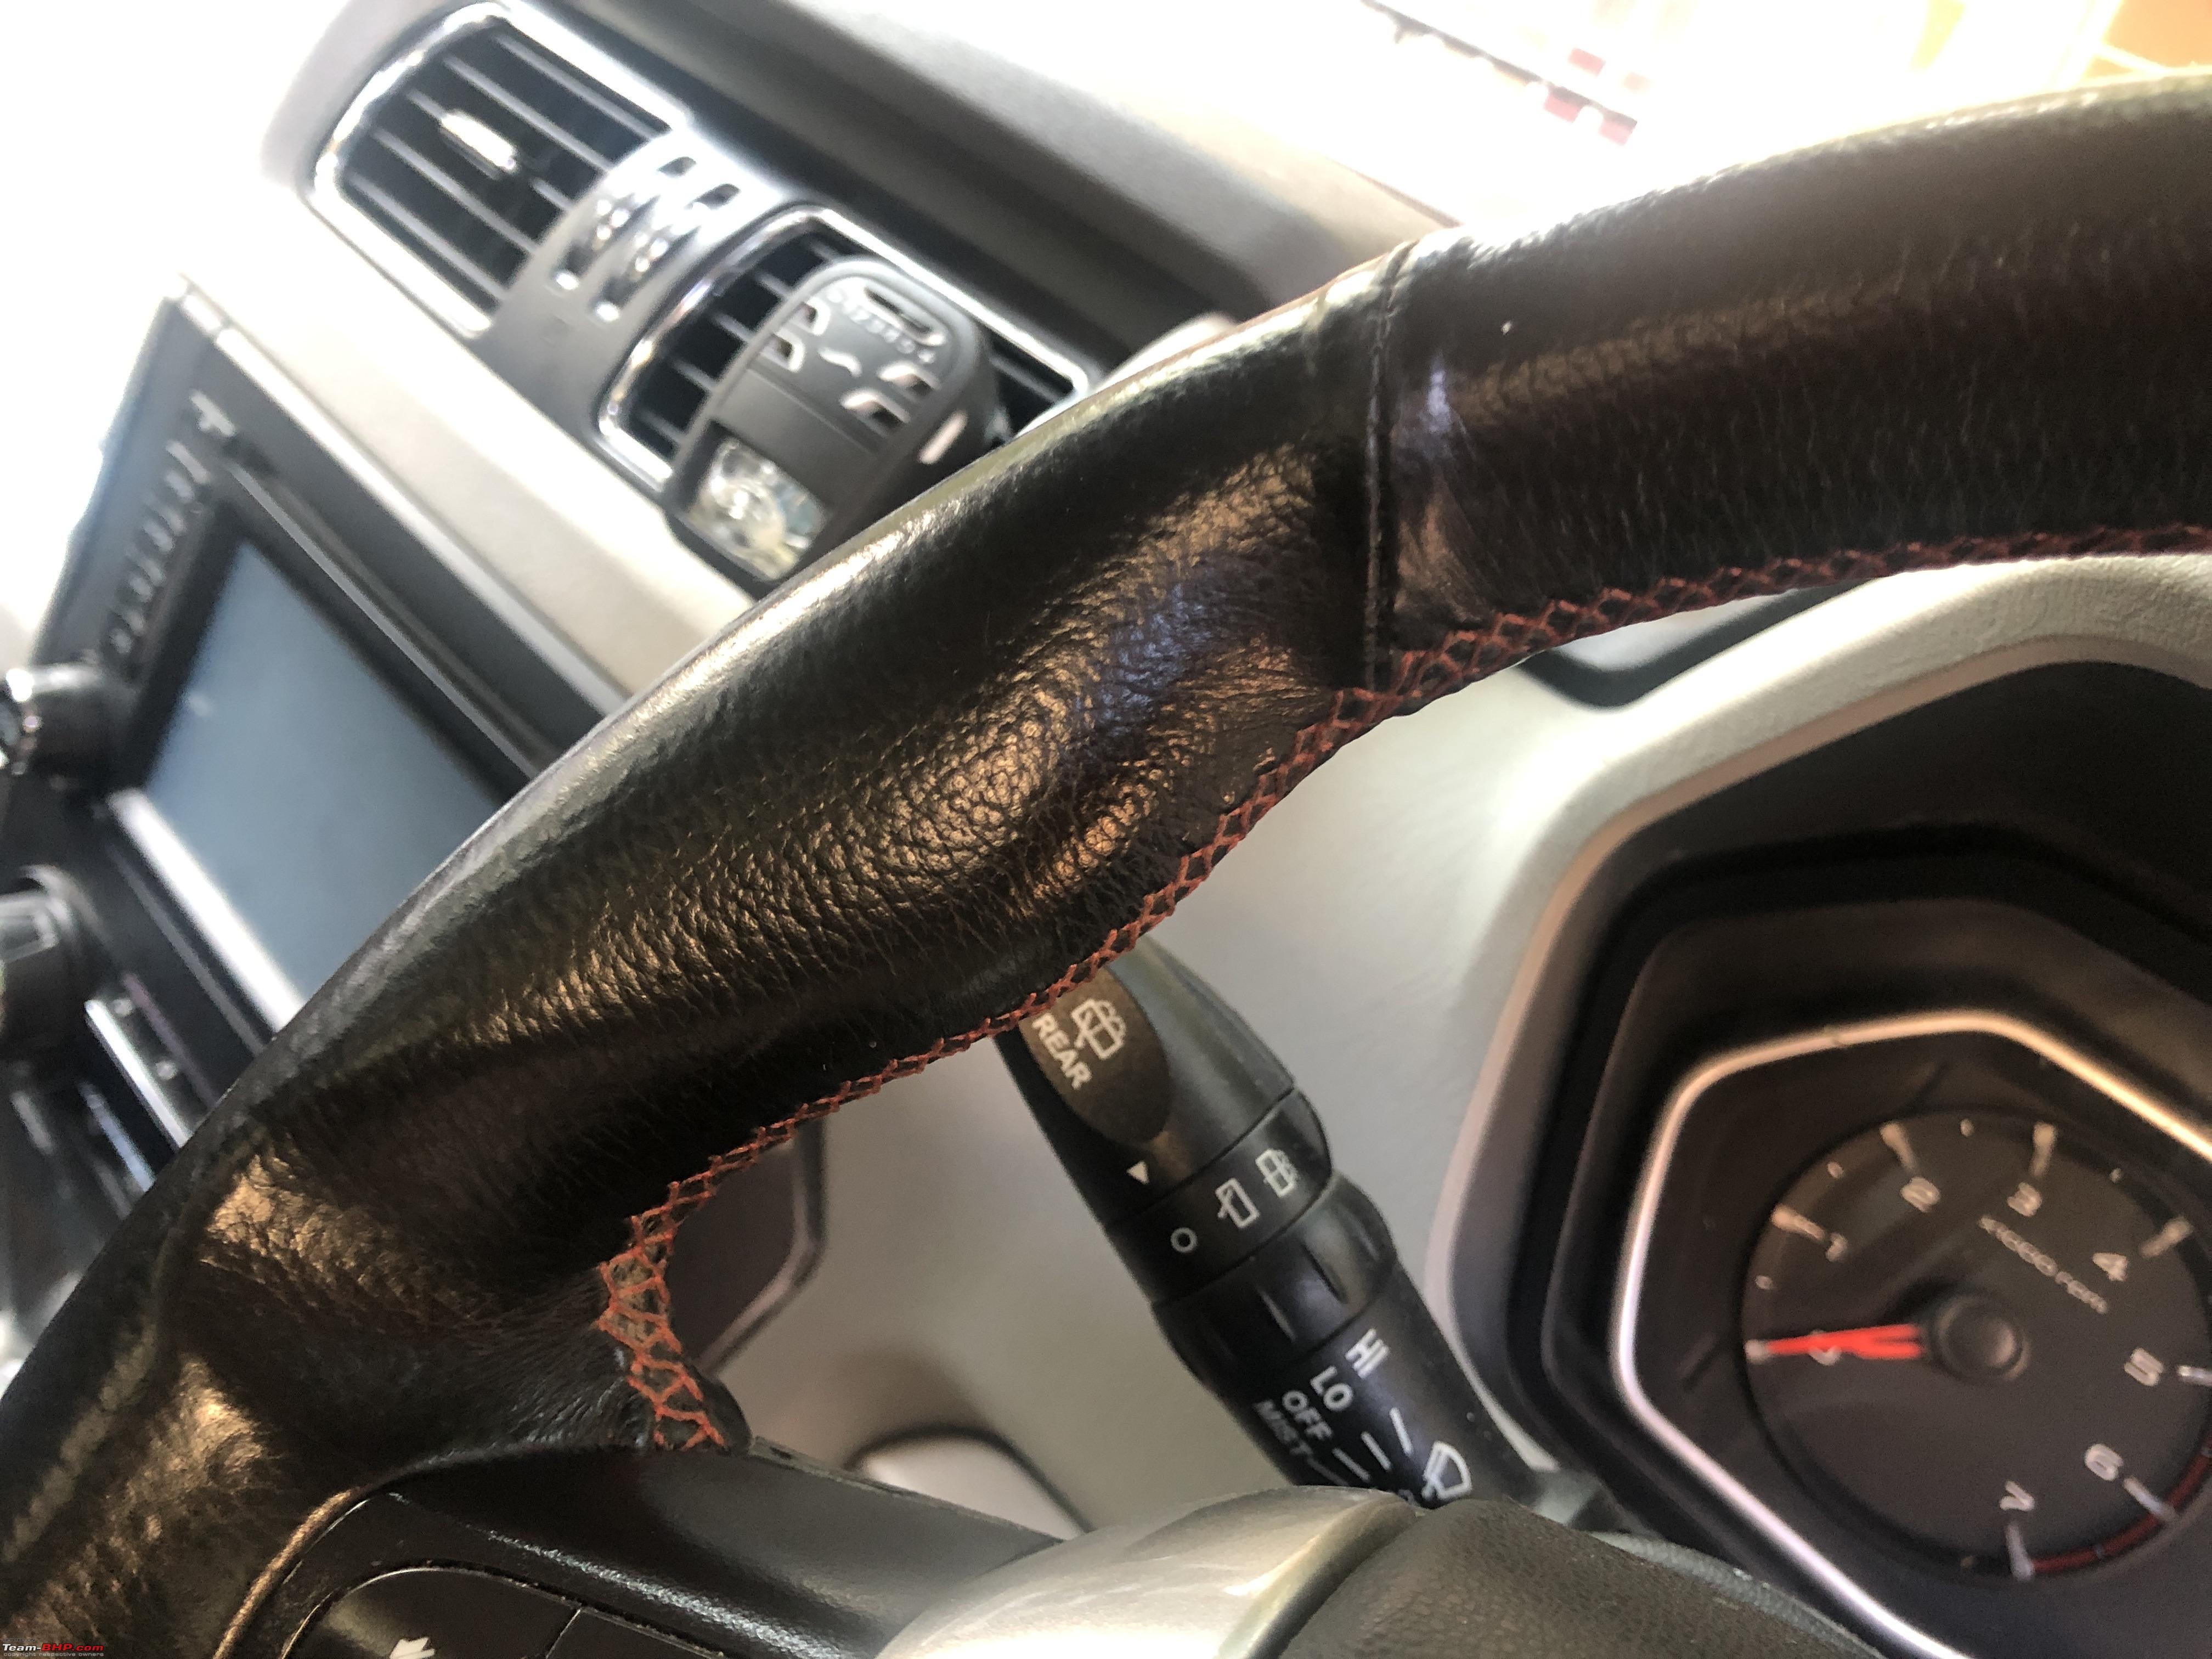 Car steering 'Covers' - are they any good? - Page 3 - Team-BHP